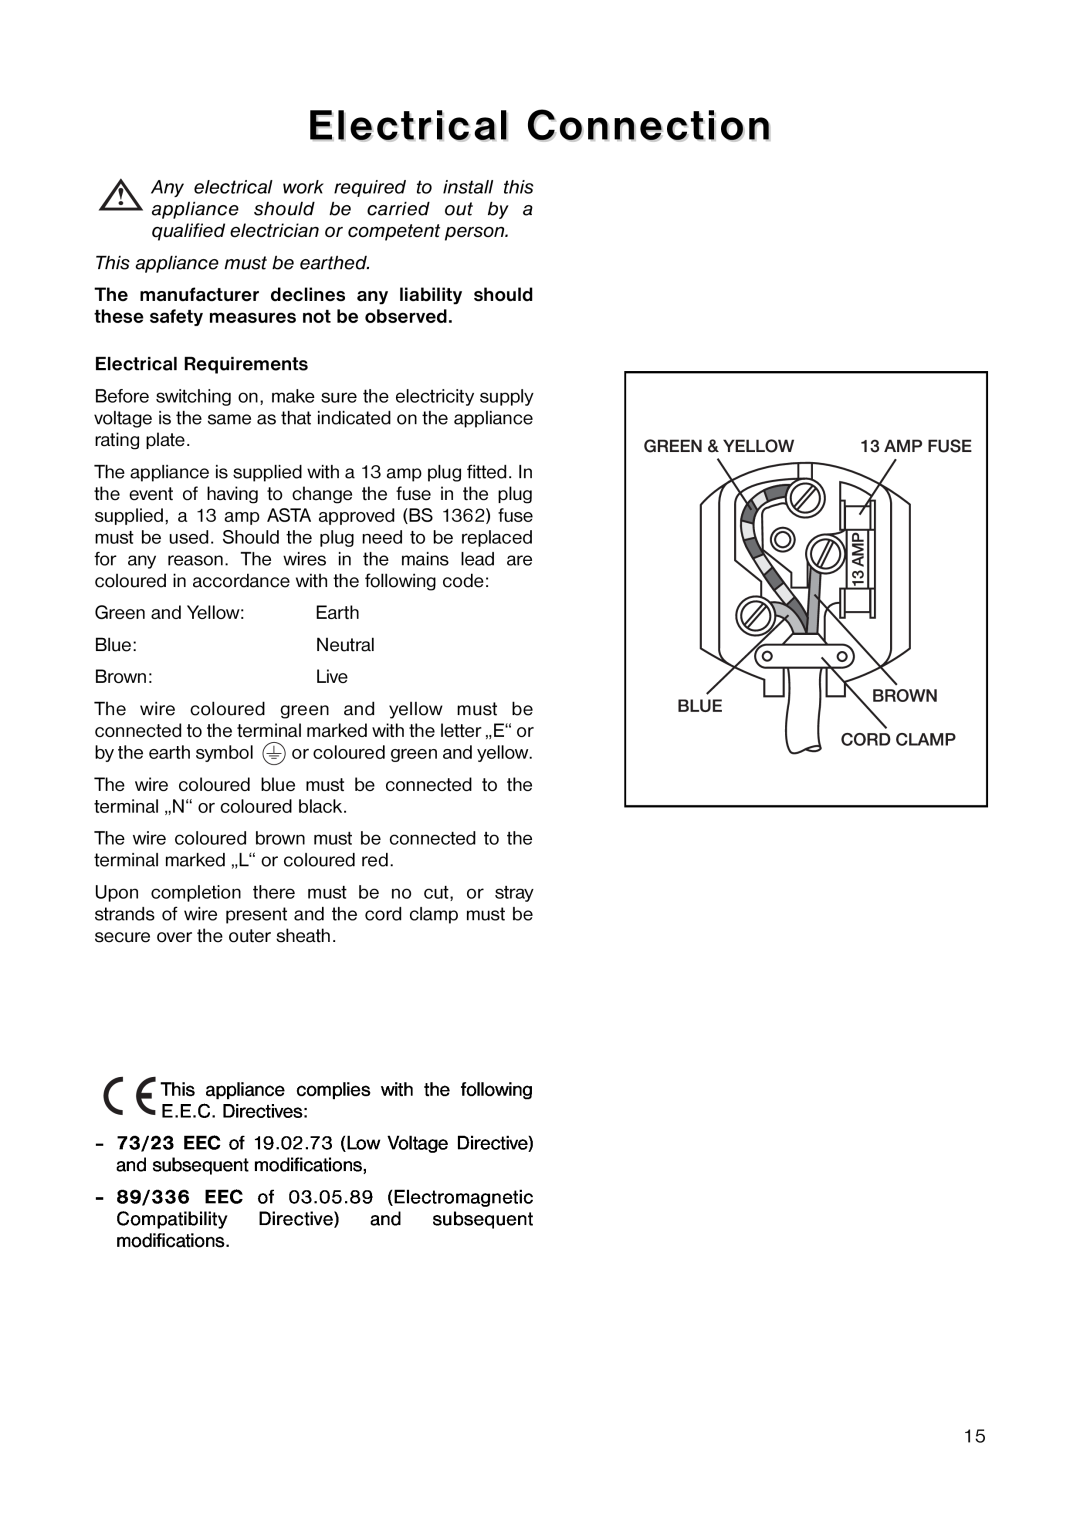 Electrolux EU 1341 T manual Electrical Connection, This appliance must be earthed, Electrical Requirements 